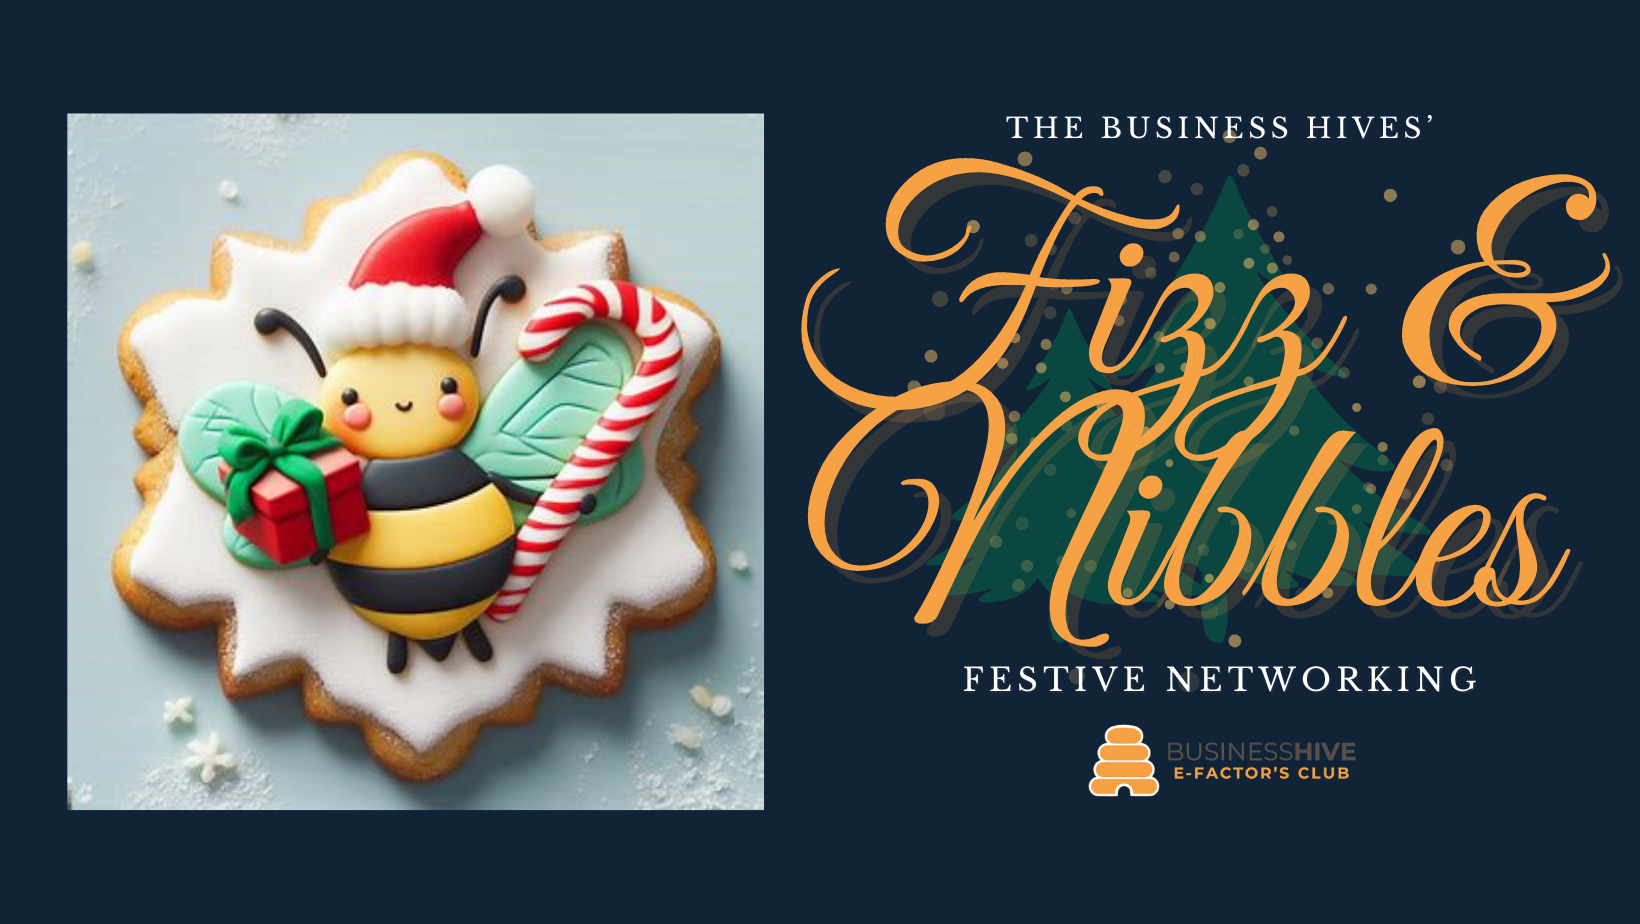 Join us at Fizz & Nibbles, the ultimate festive networking event at Business Hive in North Lincs.